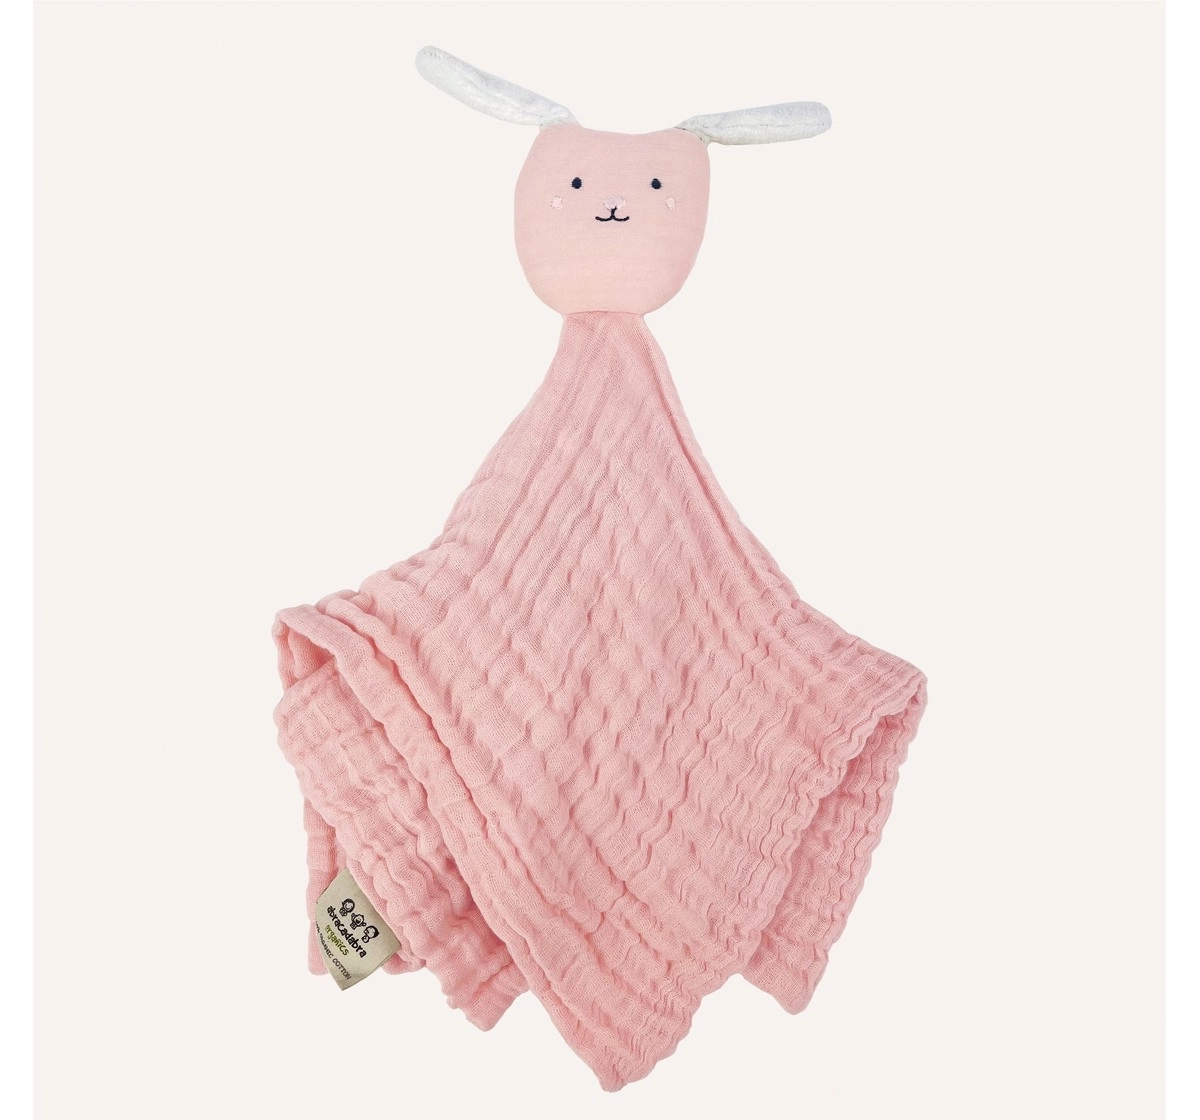 Abracadabra Organics Collectible Security Blanket with Cuddle Toy 0Y+ Pink